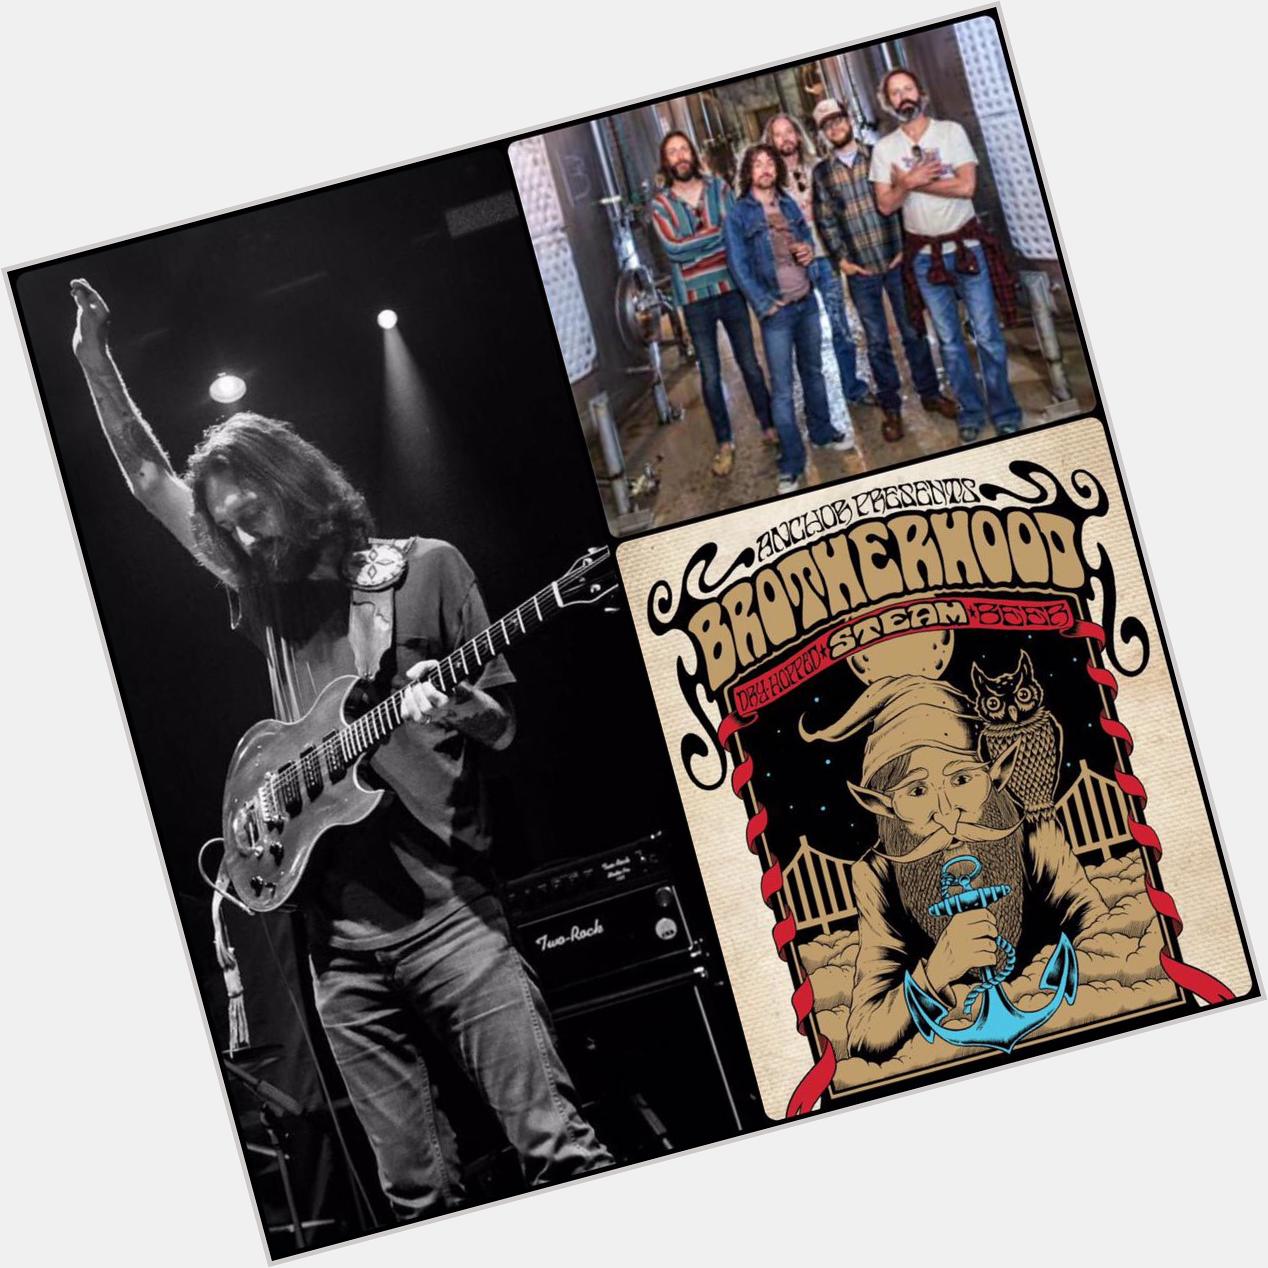 Cheers and happy birthday to our friend Chris Robinson of   